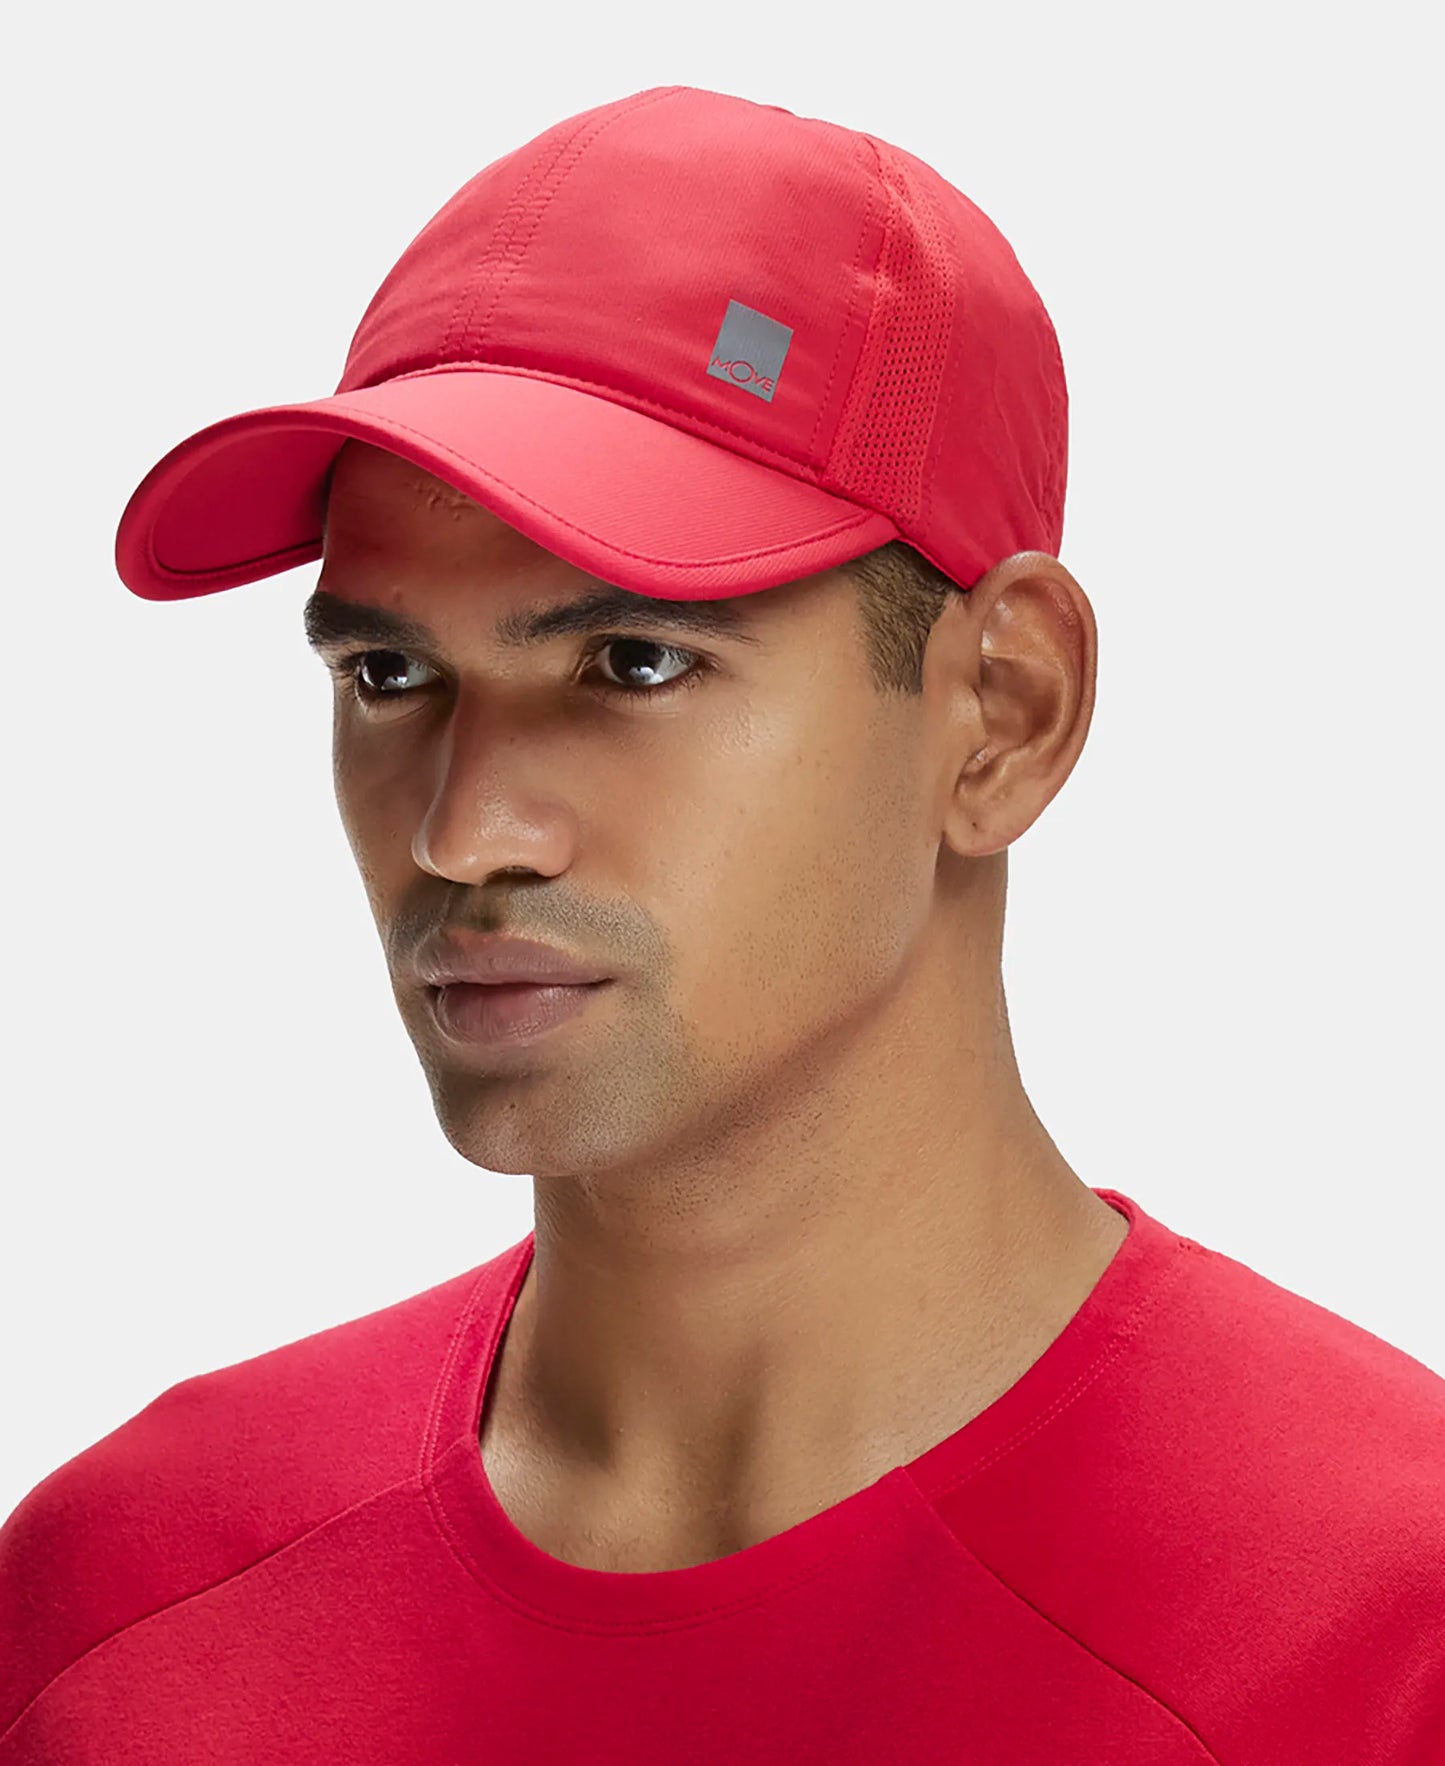 Polyester Solid Cap with Adjustable Back Closure and StayDry Technology - Bright Red-4